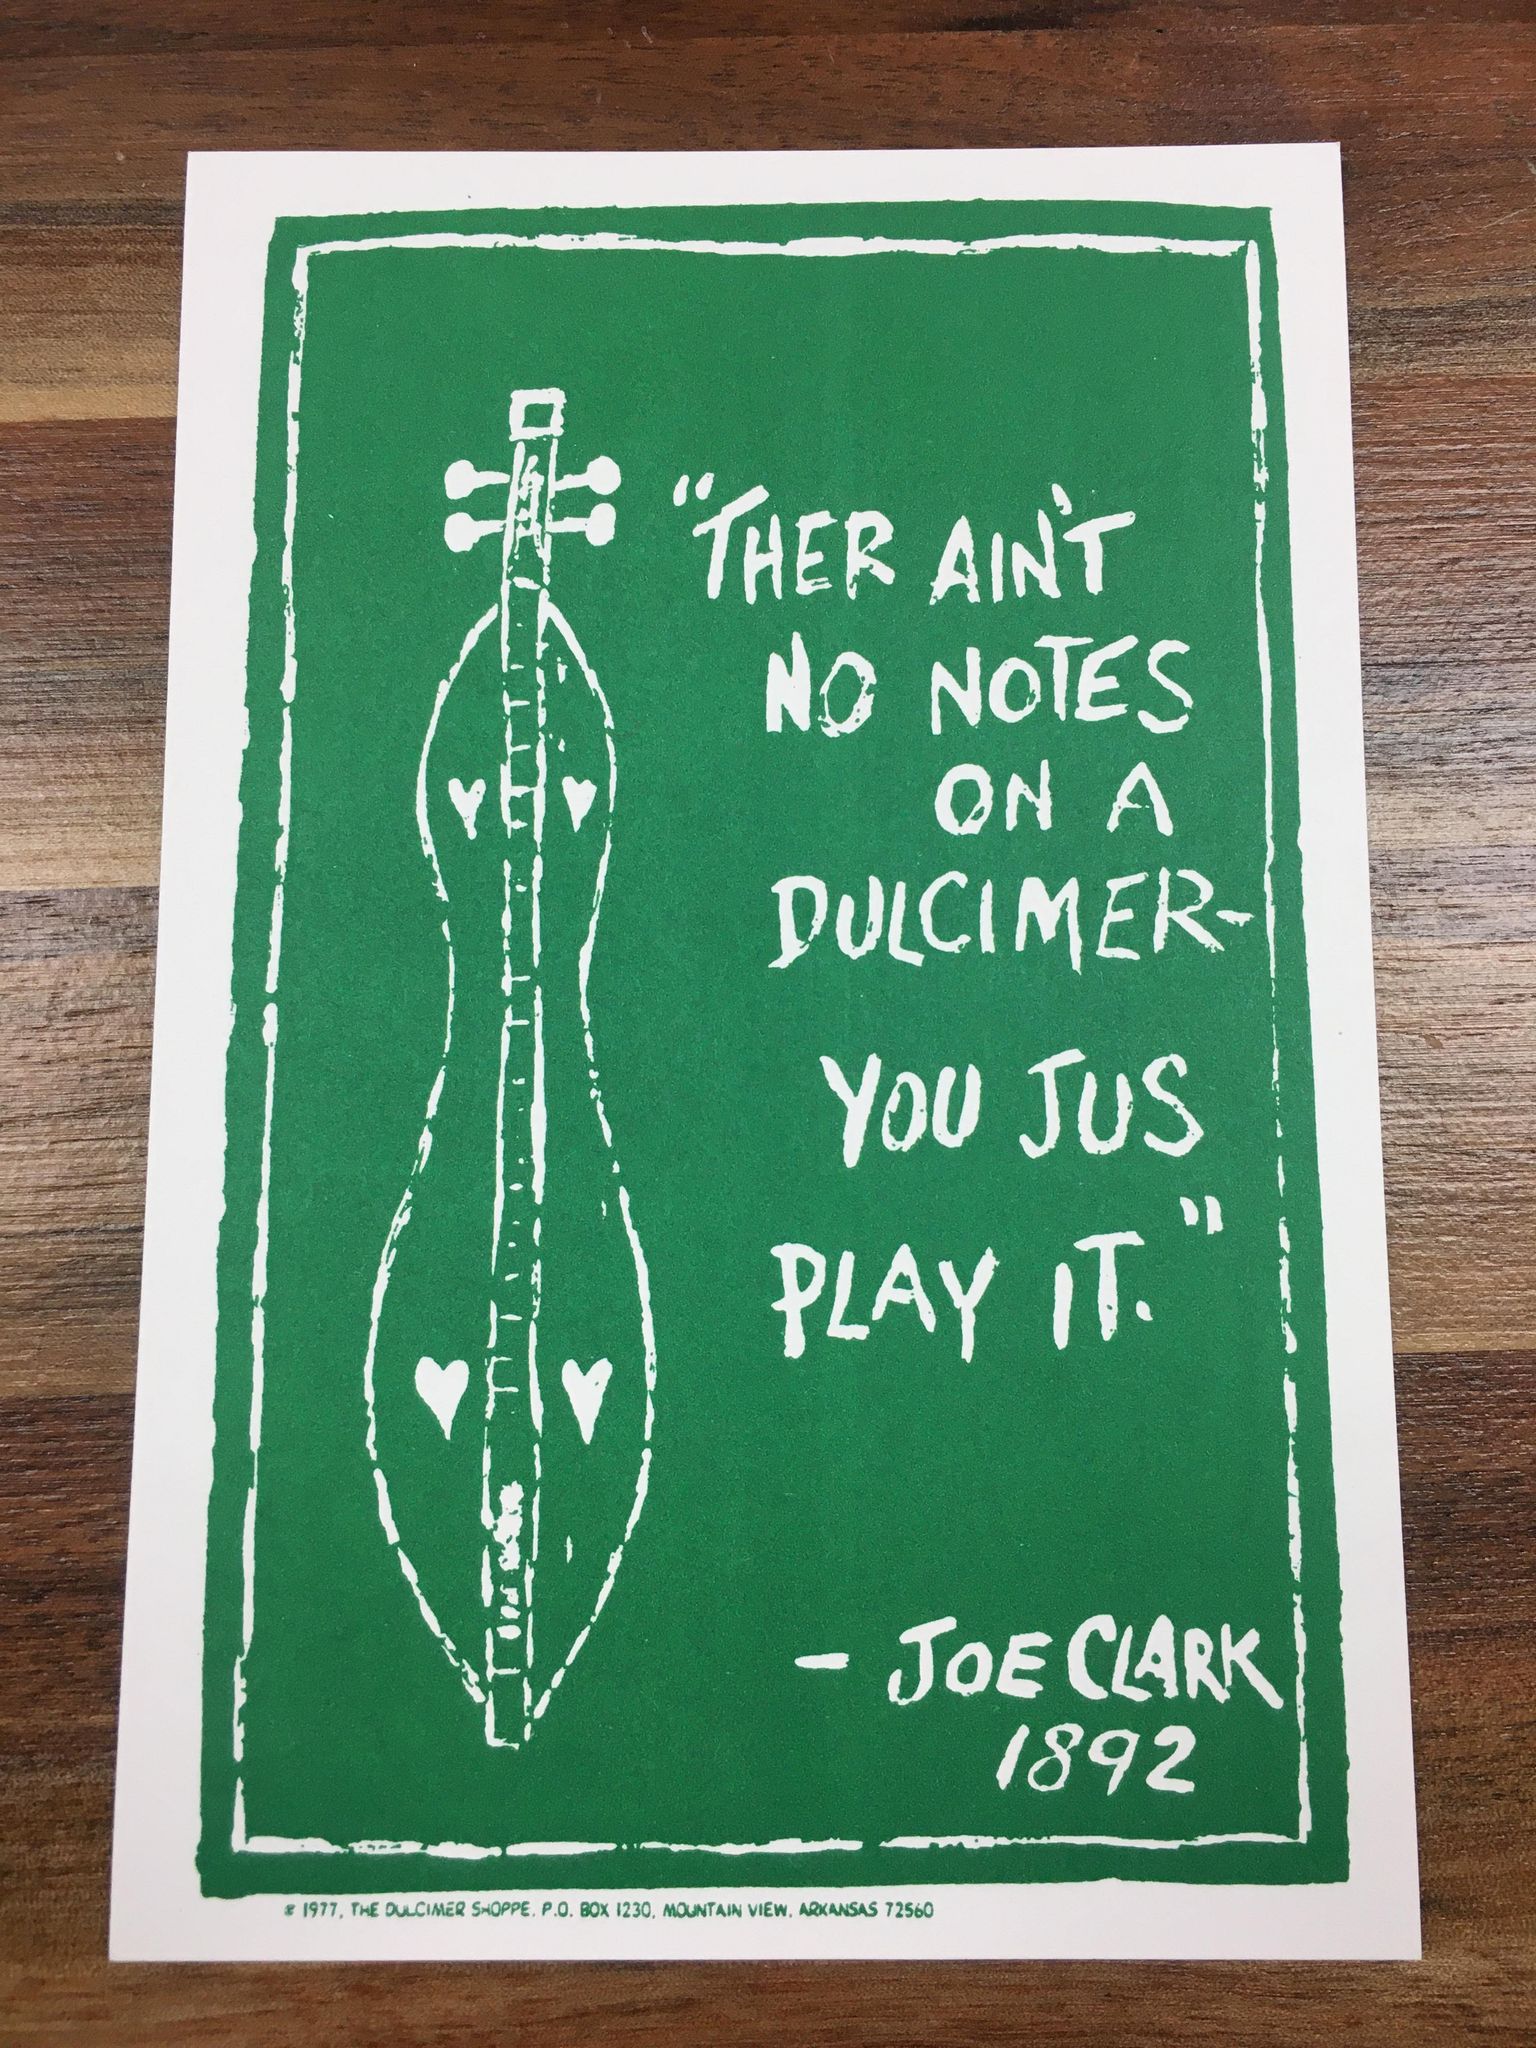 Joe Clark is an experienced musician who knows his way around a Joe Clark Postcard. As he puts it, "there ain't no notes on a Joe Clark Postcard, you just play it." Joe's